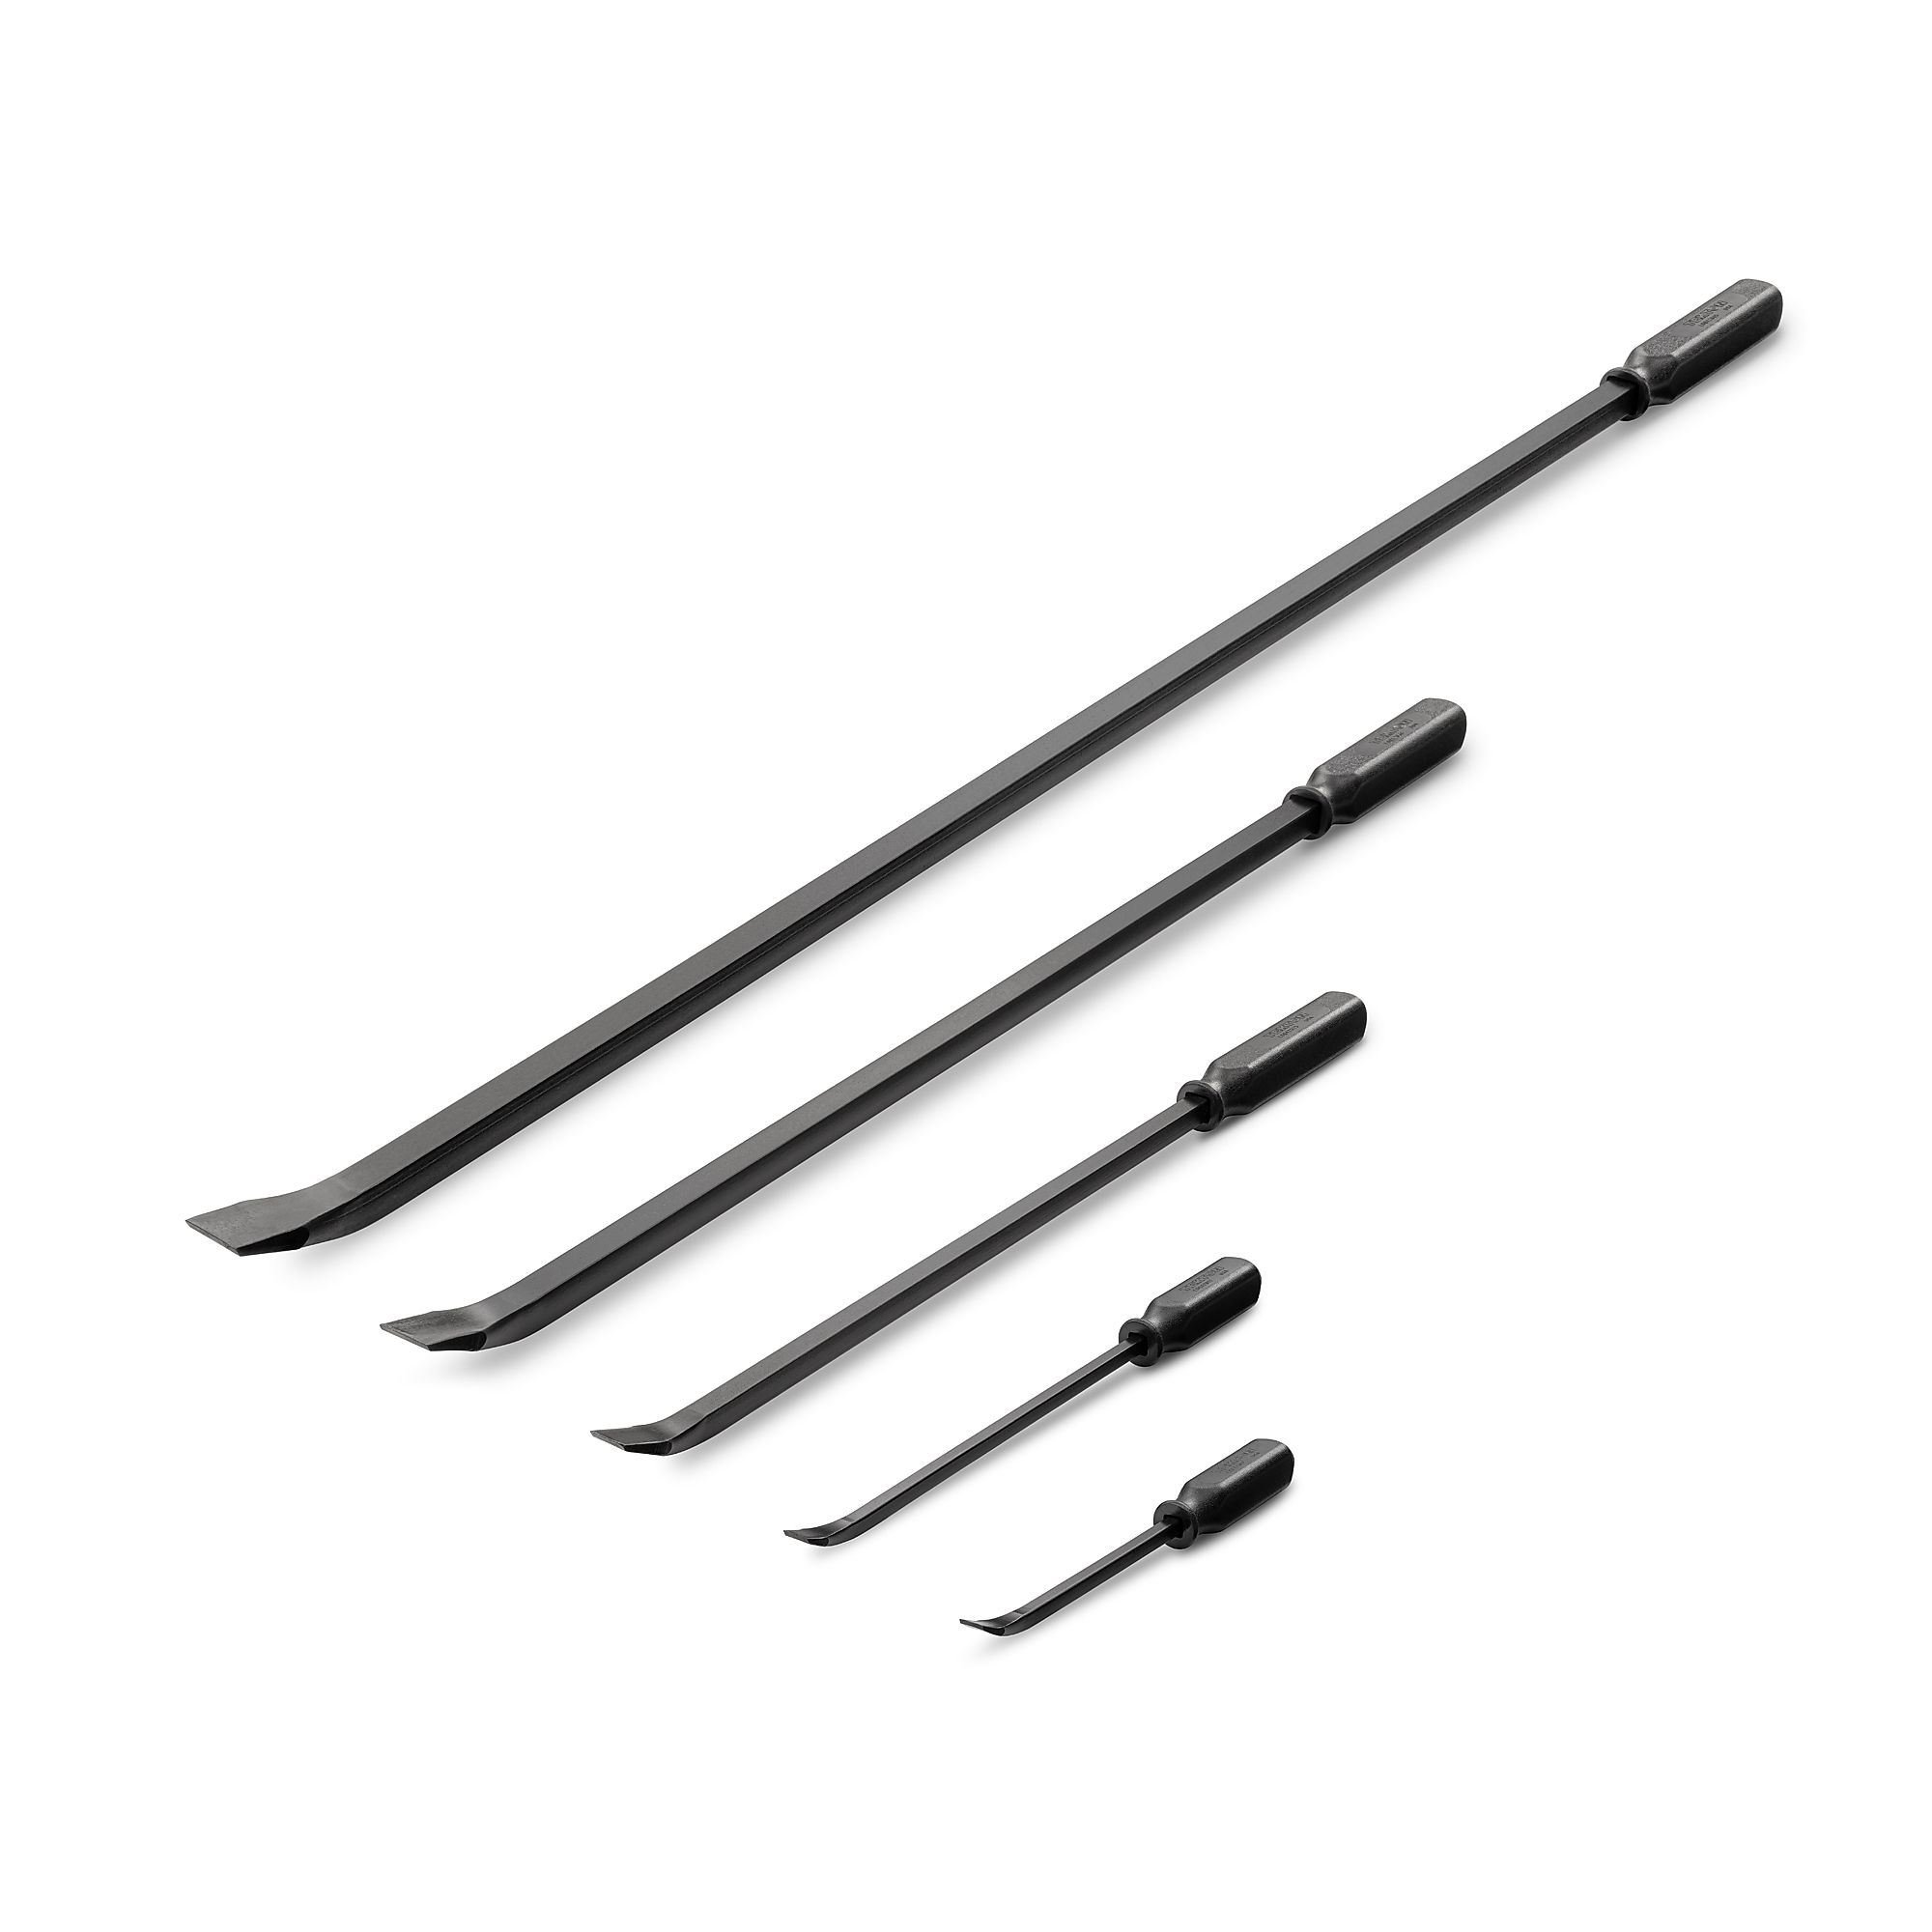 Tekton, 5-Piece Angled End Pry Bar Set, Material Steel, Pieces (qty.) 5 Model LSQ90505